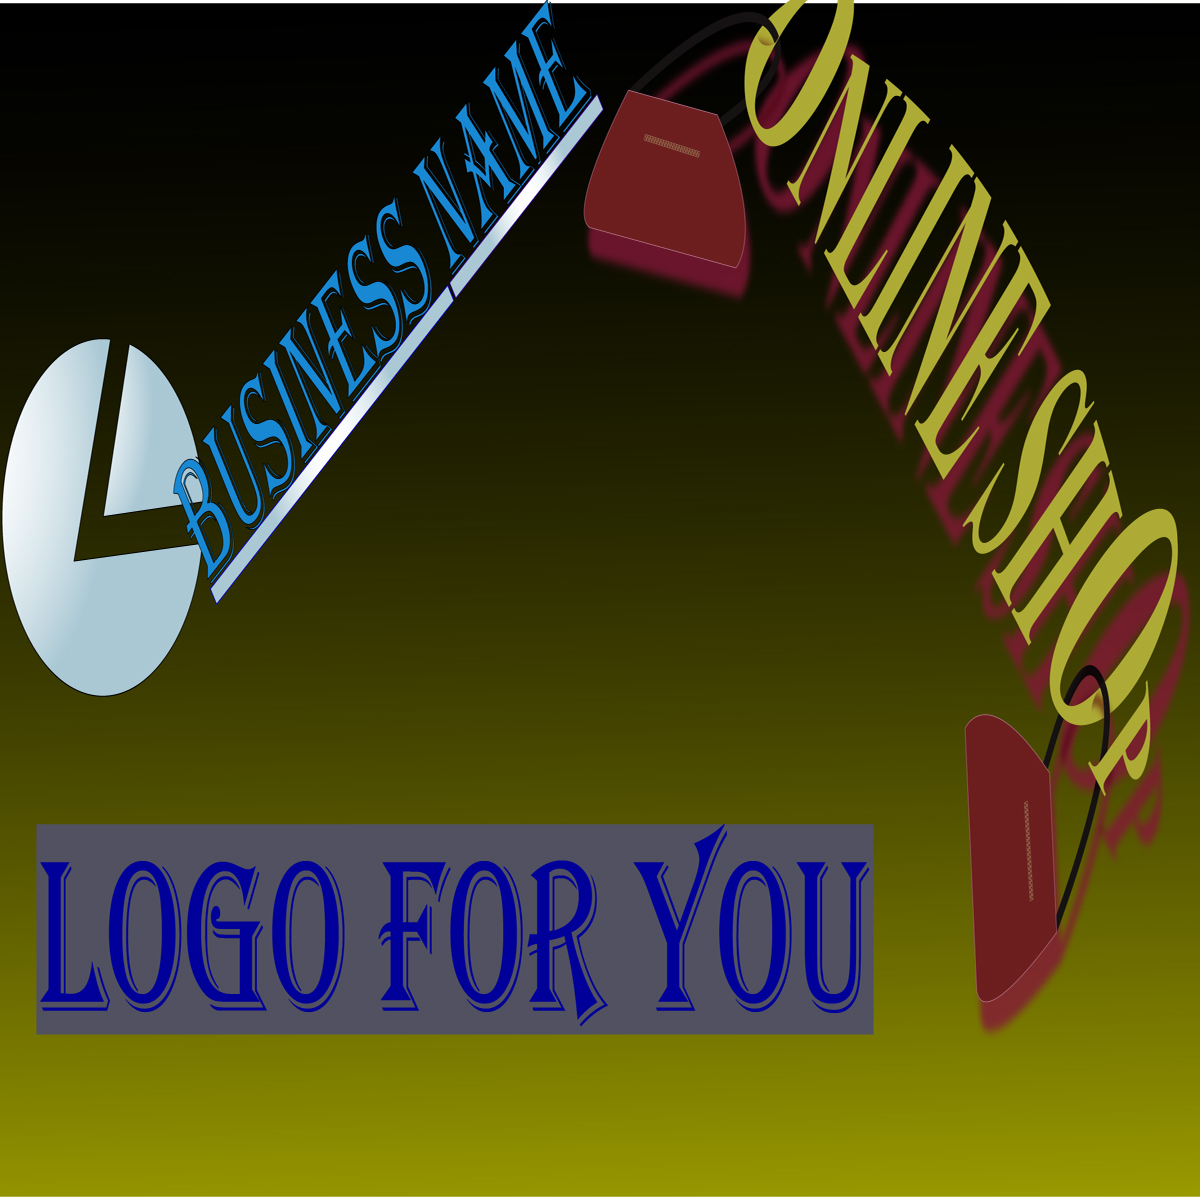 3 IN 1 BUSINESS LOGO cover image.